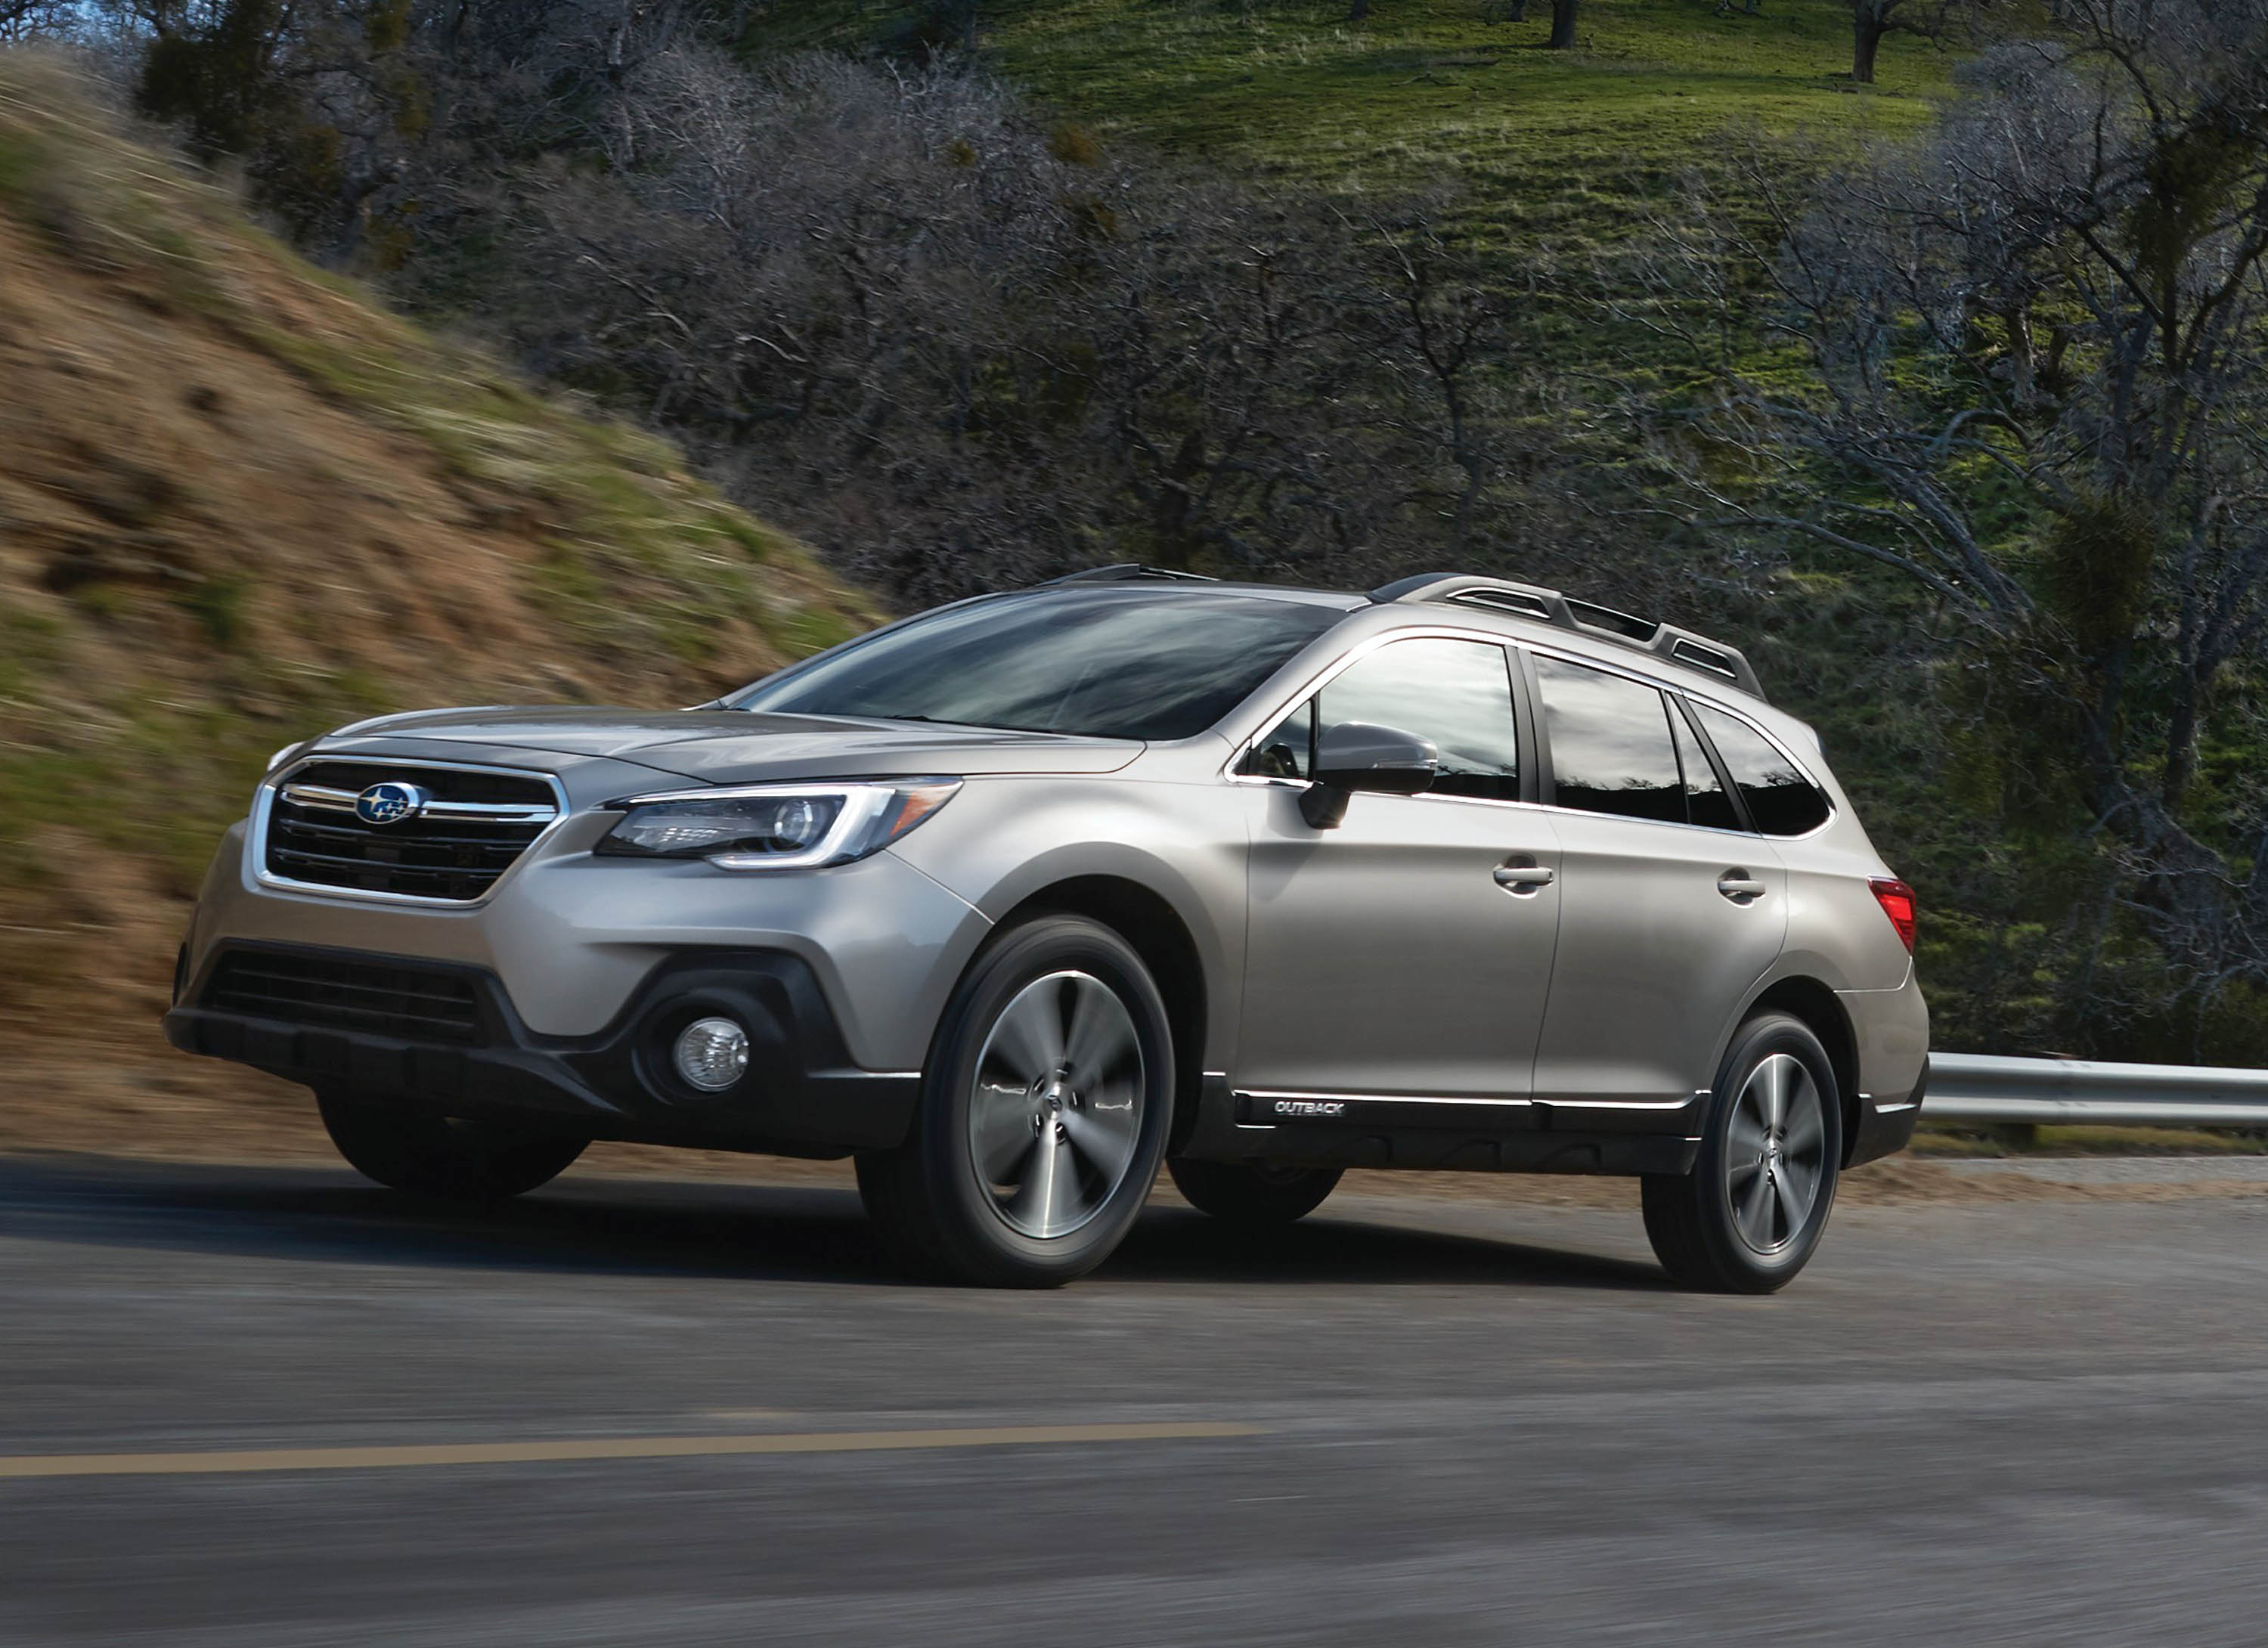 Thats So Gay 2018 Subaru Outback Is The Lesbian Classic That Now